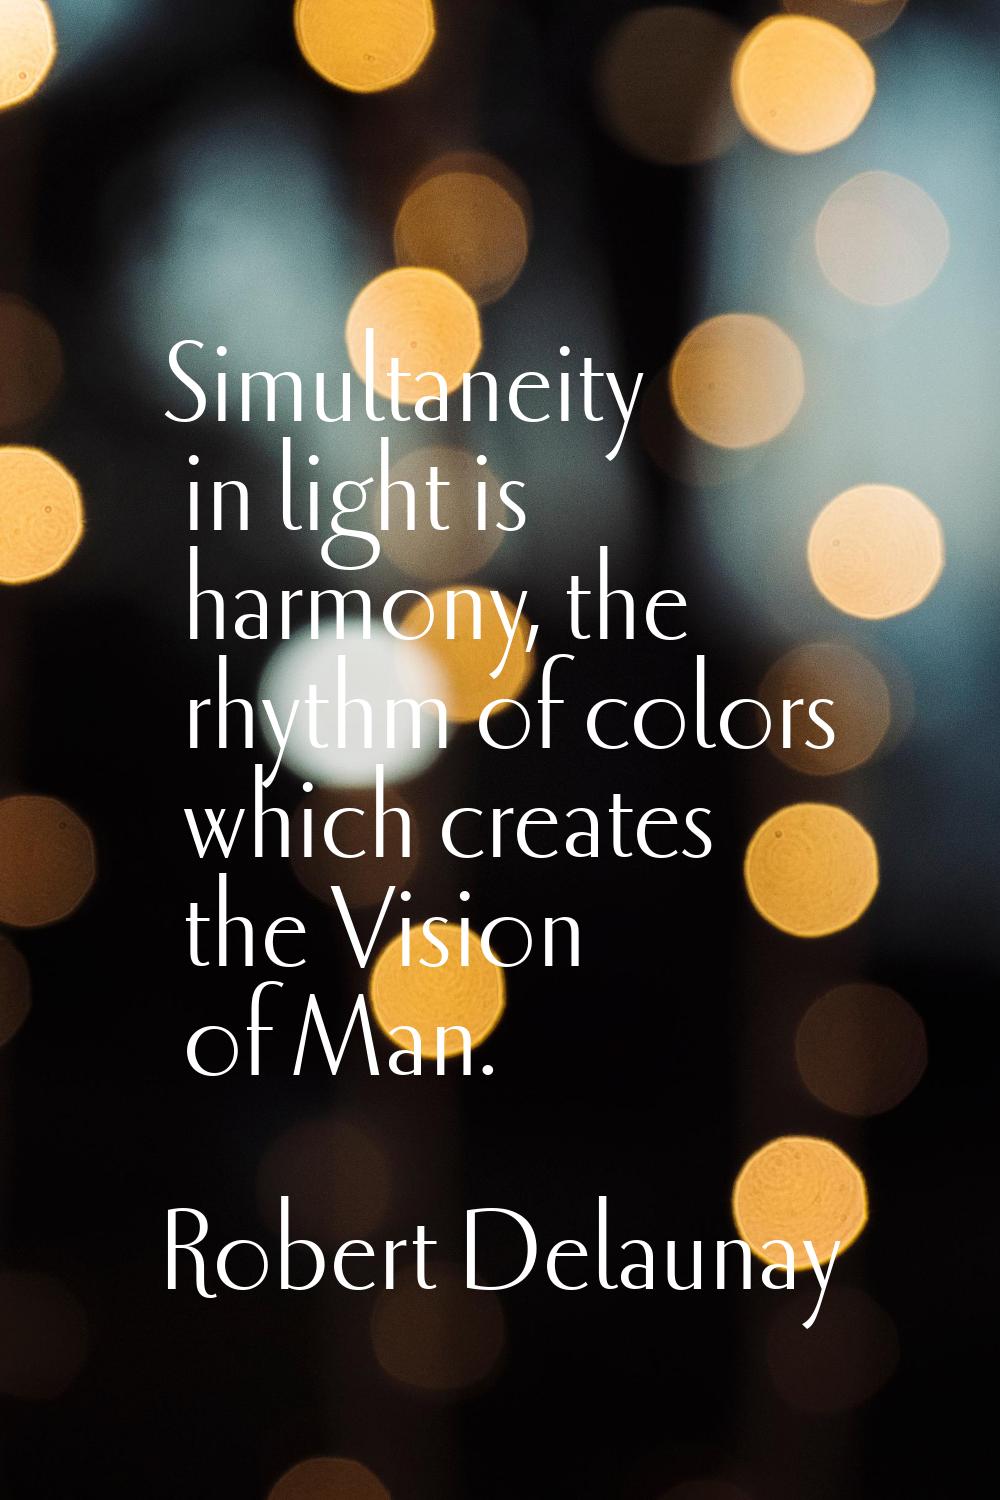 Simultaneity in light is harmony, the rhythm of colors which creates the Vision of Man.